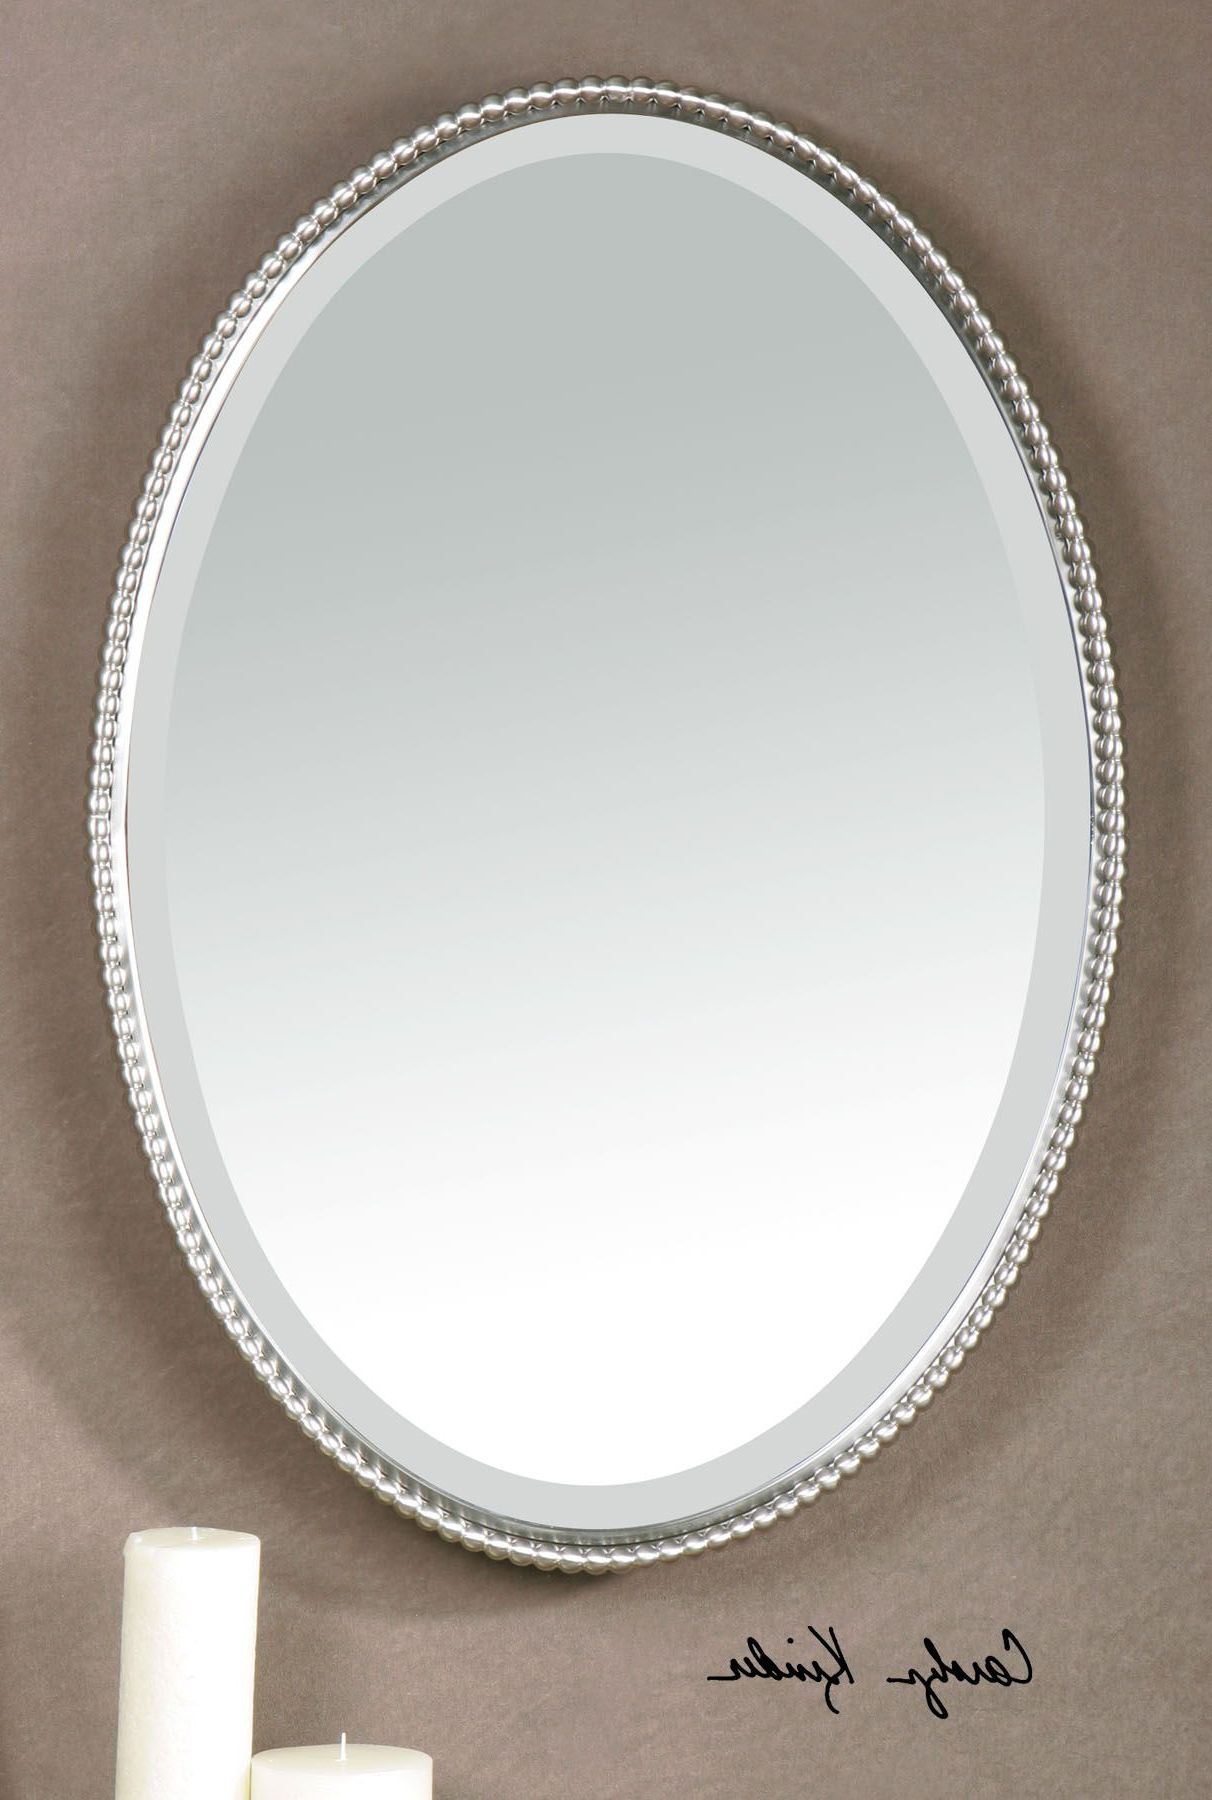 Famous Silver Nickel Beaded Edge Oval Wall Mirror 32" Vanity Bathroom Horchow For Round Beaded Trim Wall Mirrors (View 2 of 15)